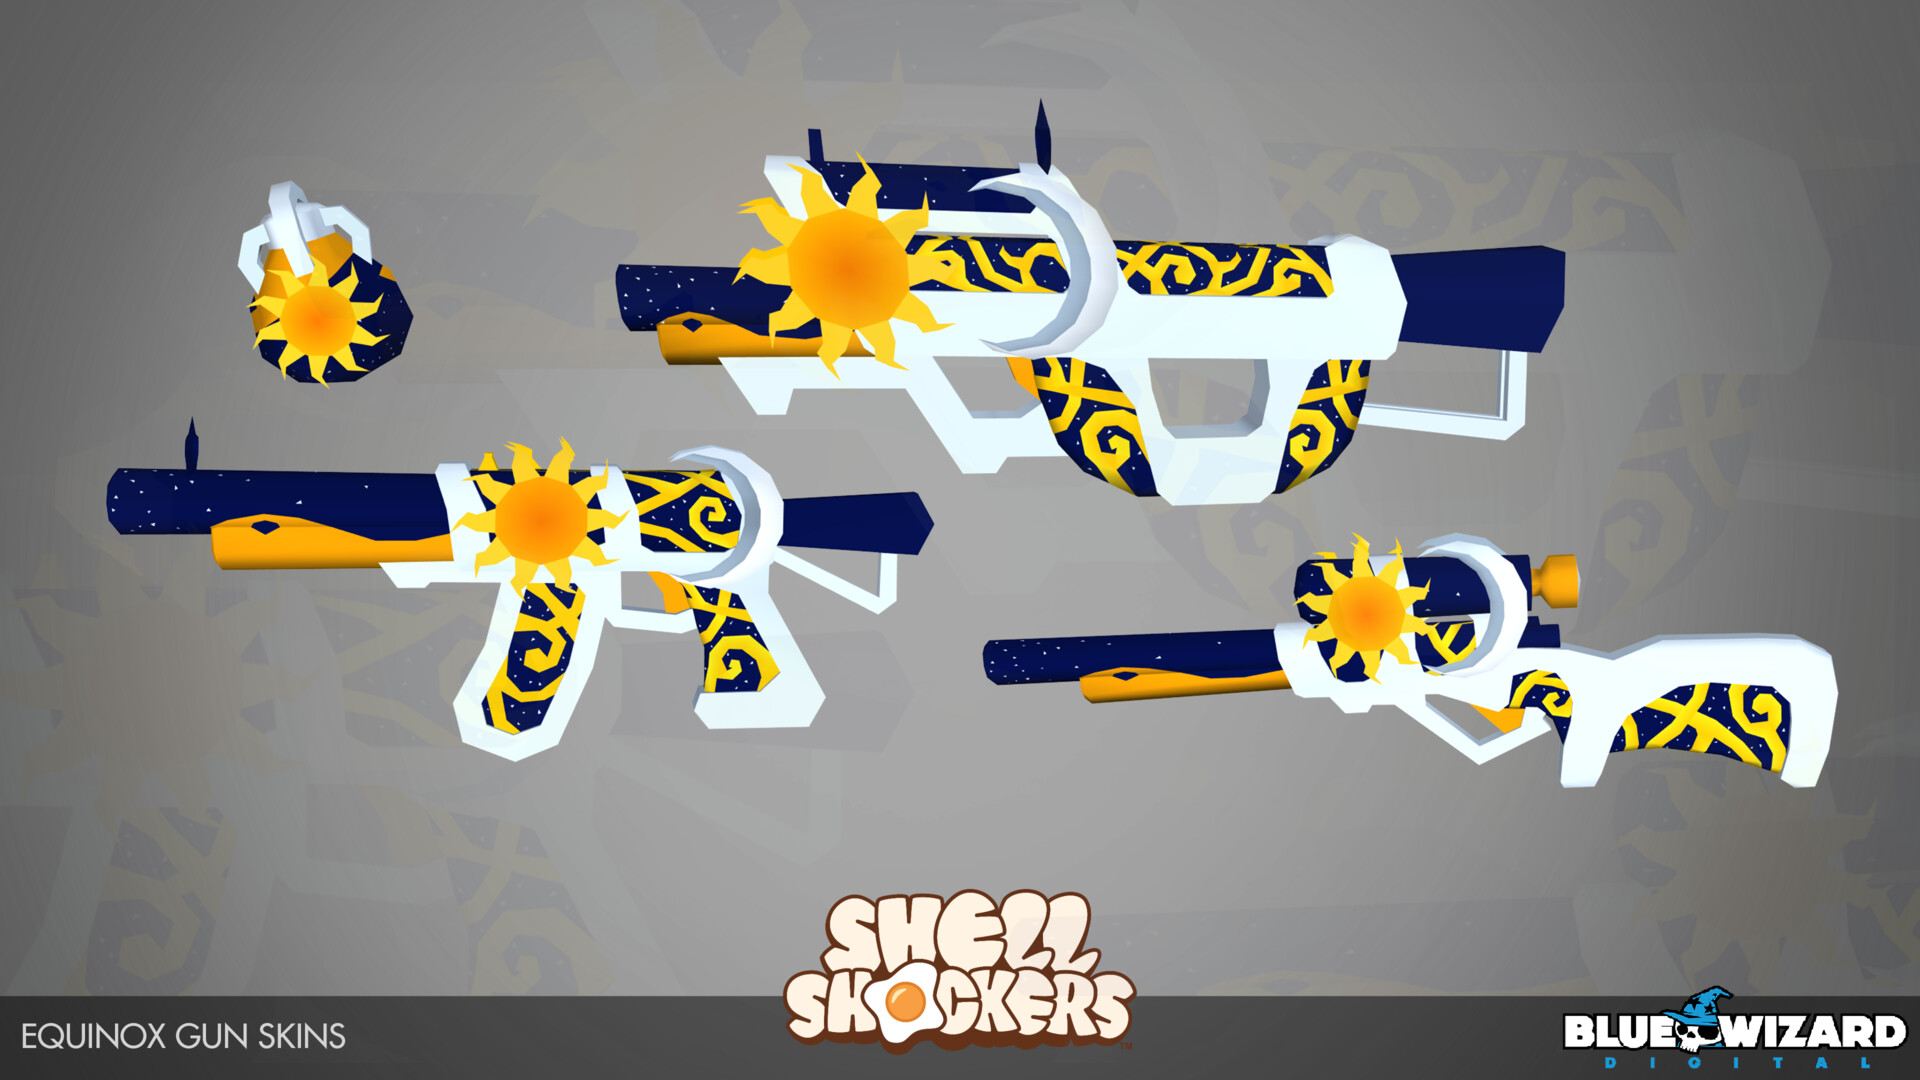 ALL THE SKINS! - Shell Shockers 